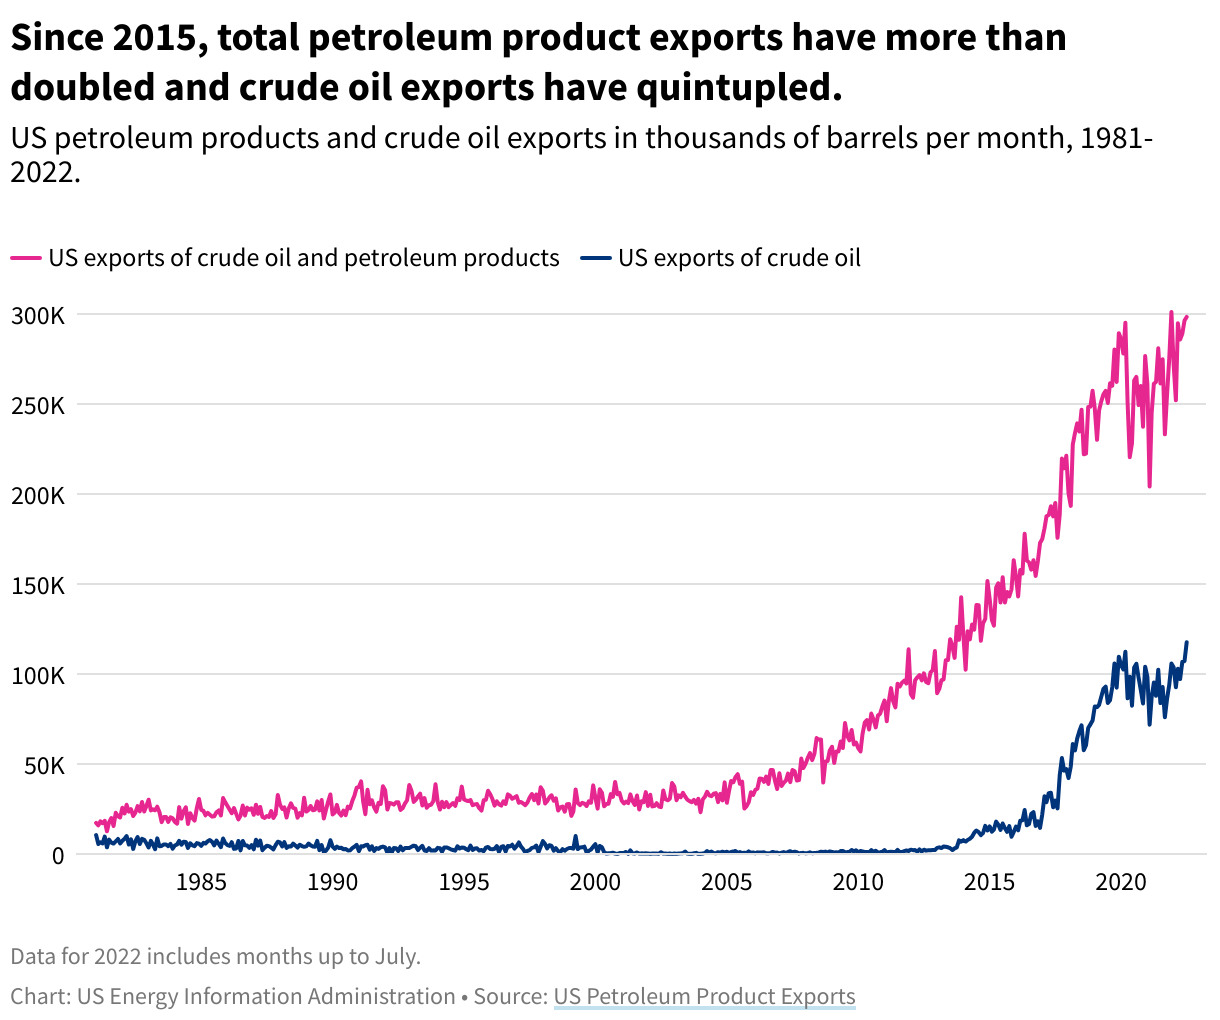 A line graph depicting total US petroleum products and crude oil exports in thousands of barrels per month between 1981and 2021.